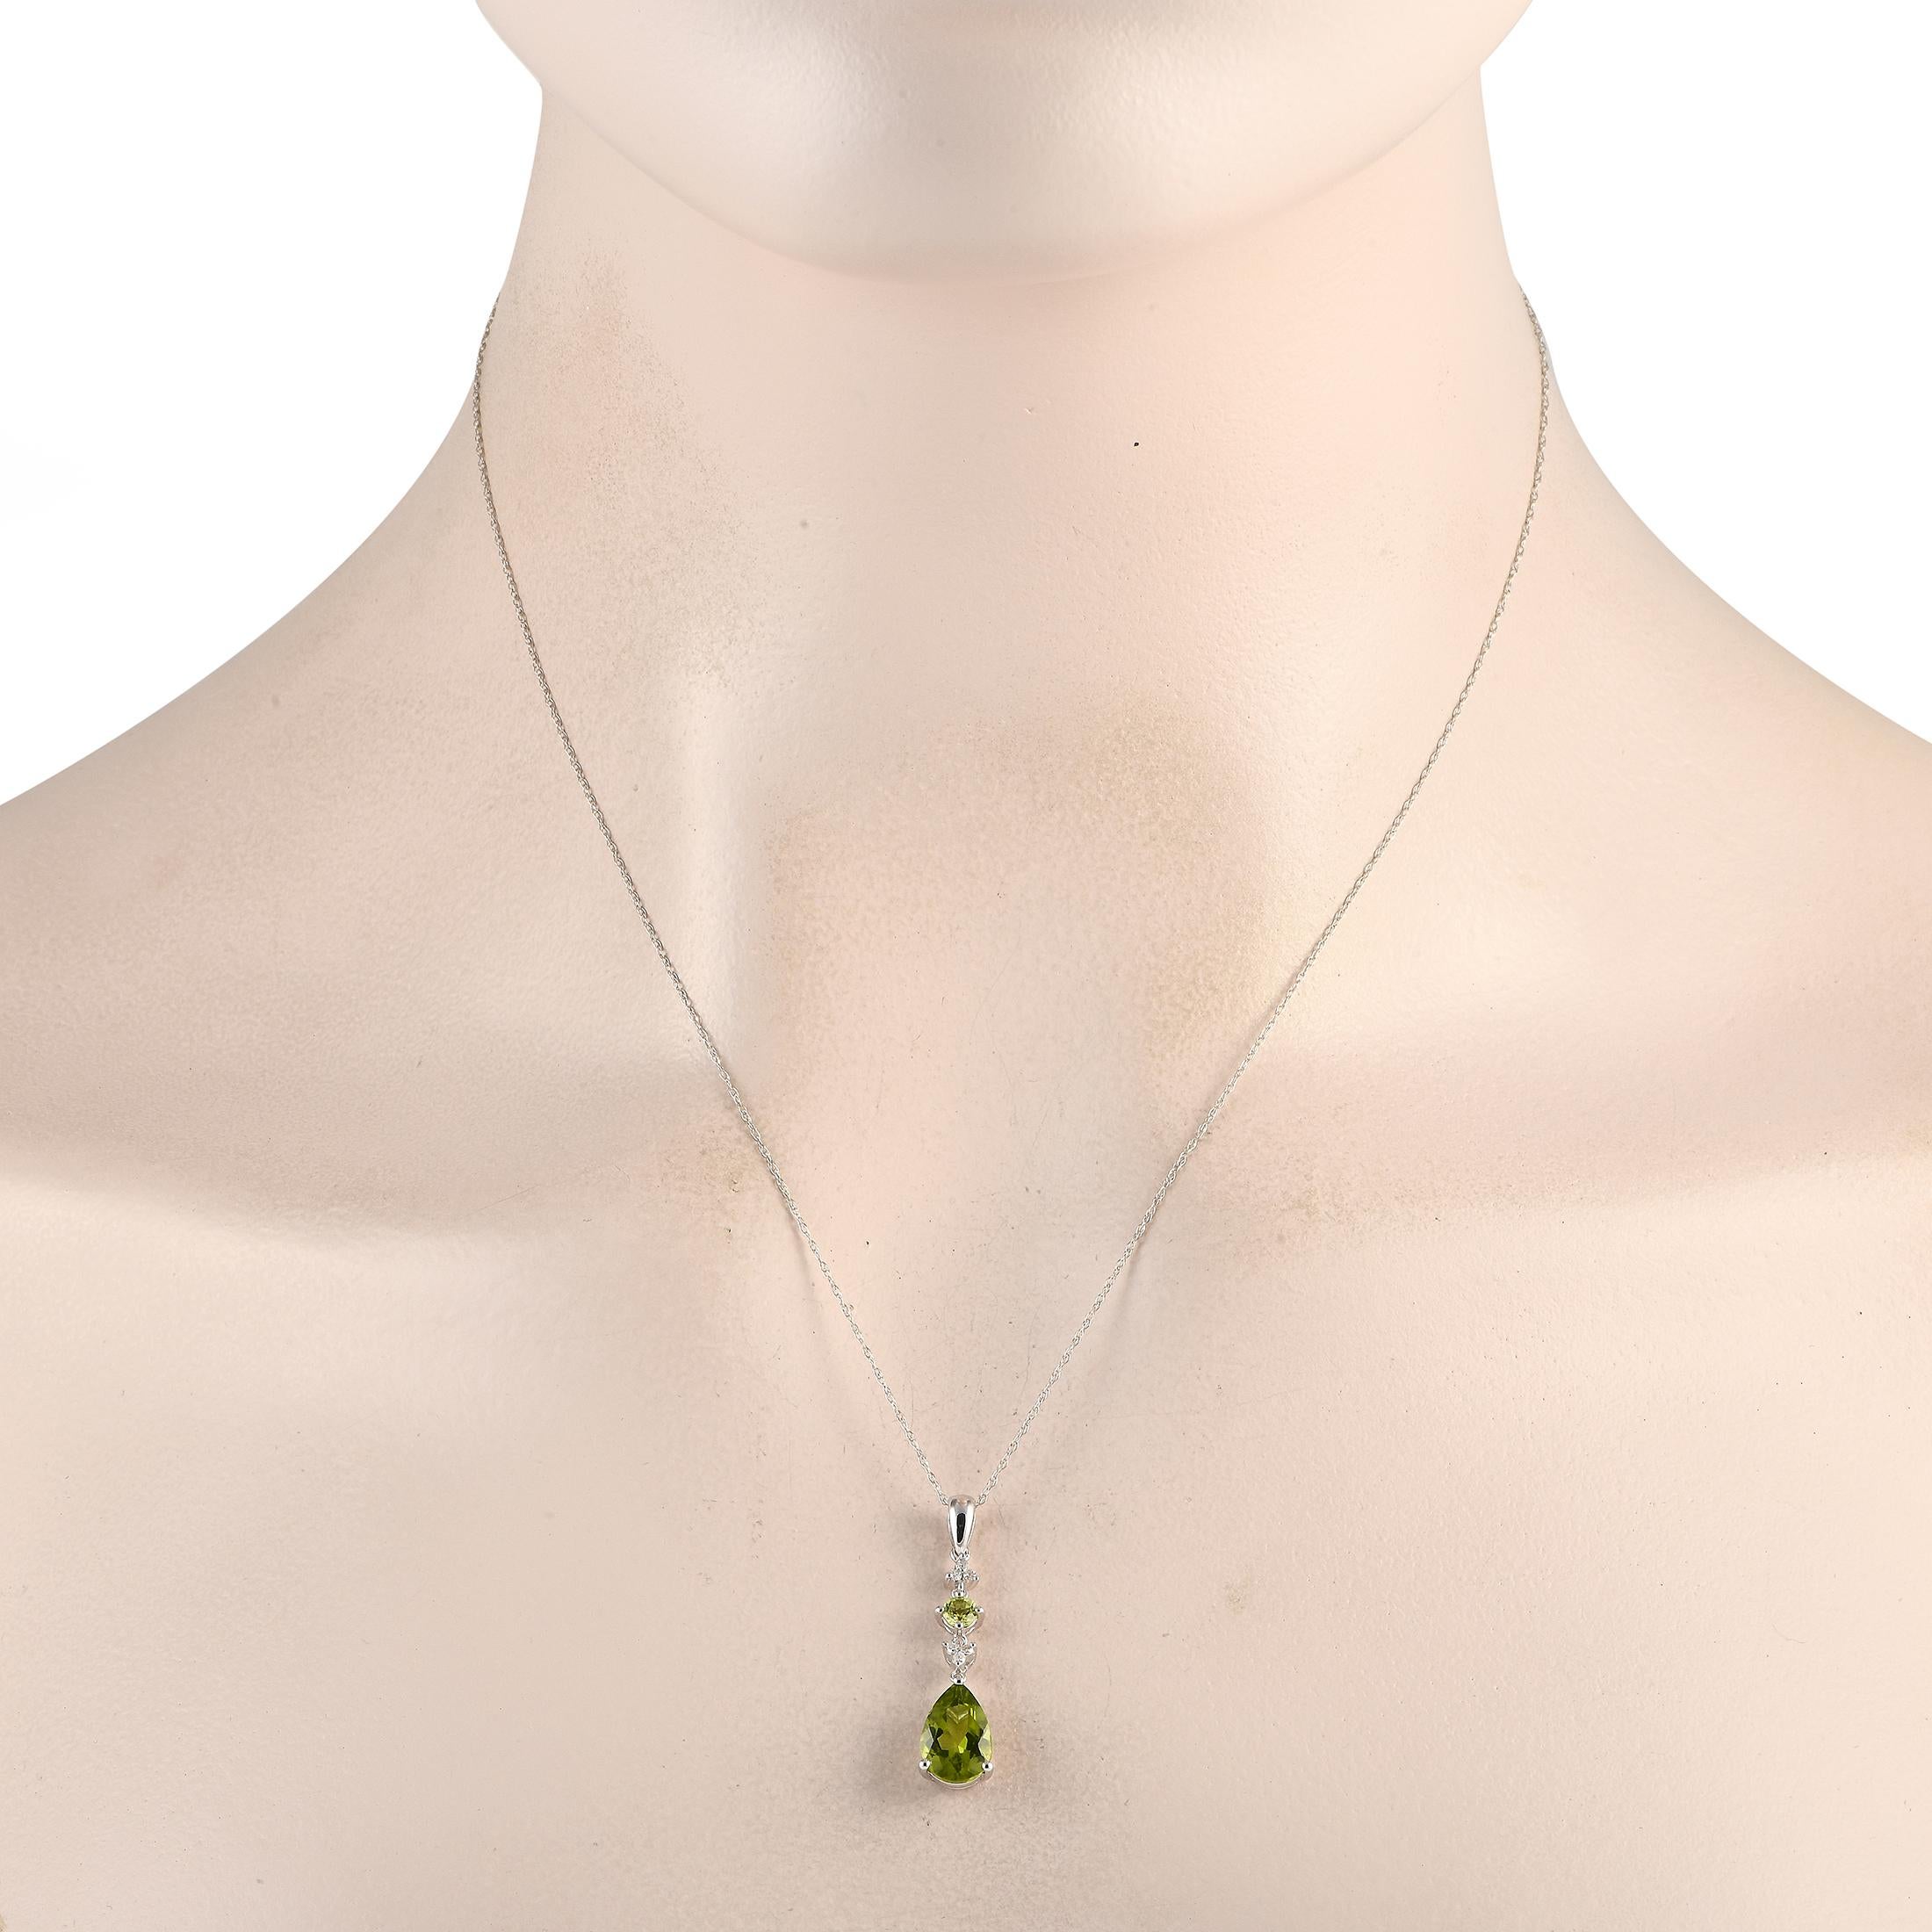 A pair of Peridot gemstones with a captivating green hue make this necklace simply unforgettable. Crafted from 14K White Gold, this pieces intricate pendant measures 1.25 long by 0.25 wide and is suspended from an 18 chain. It also comes complete